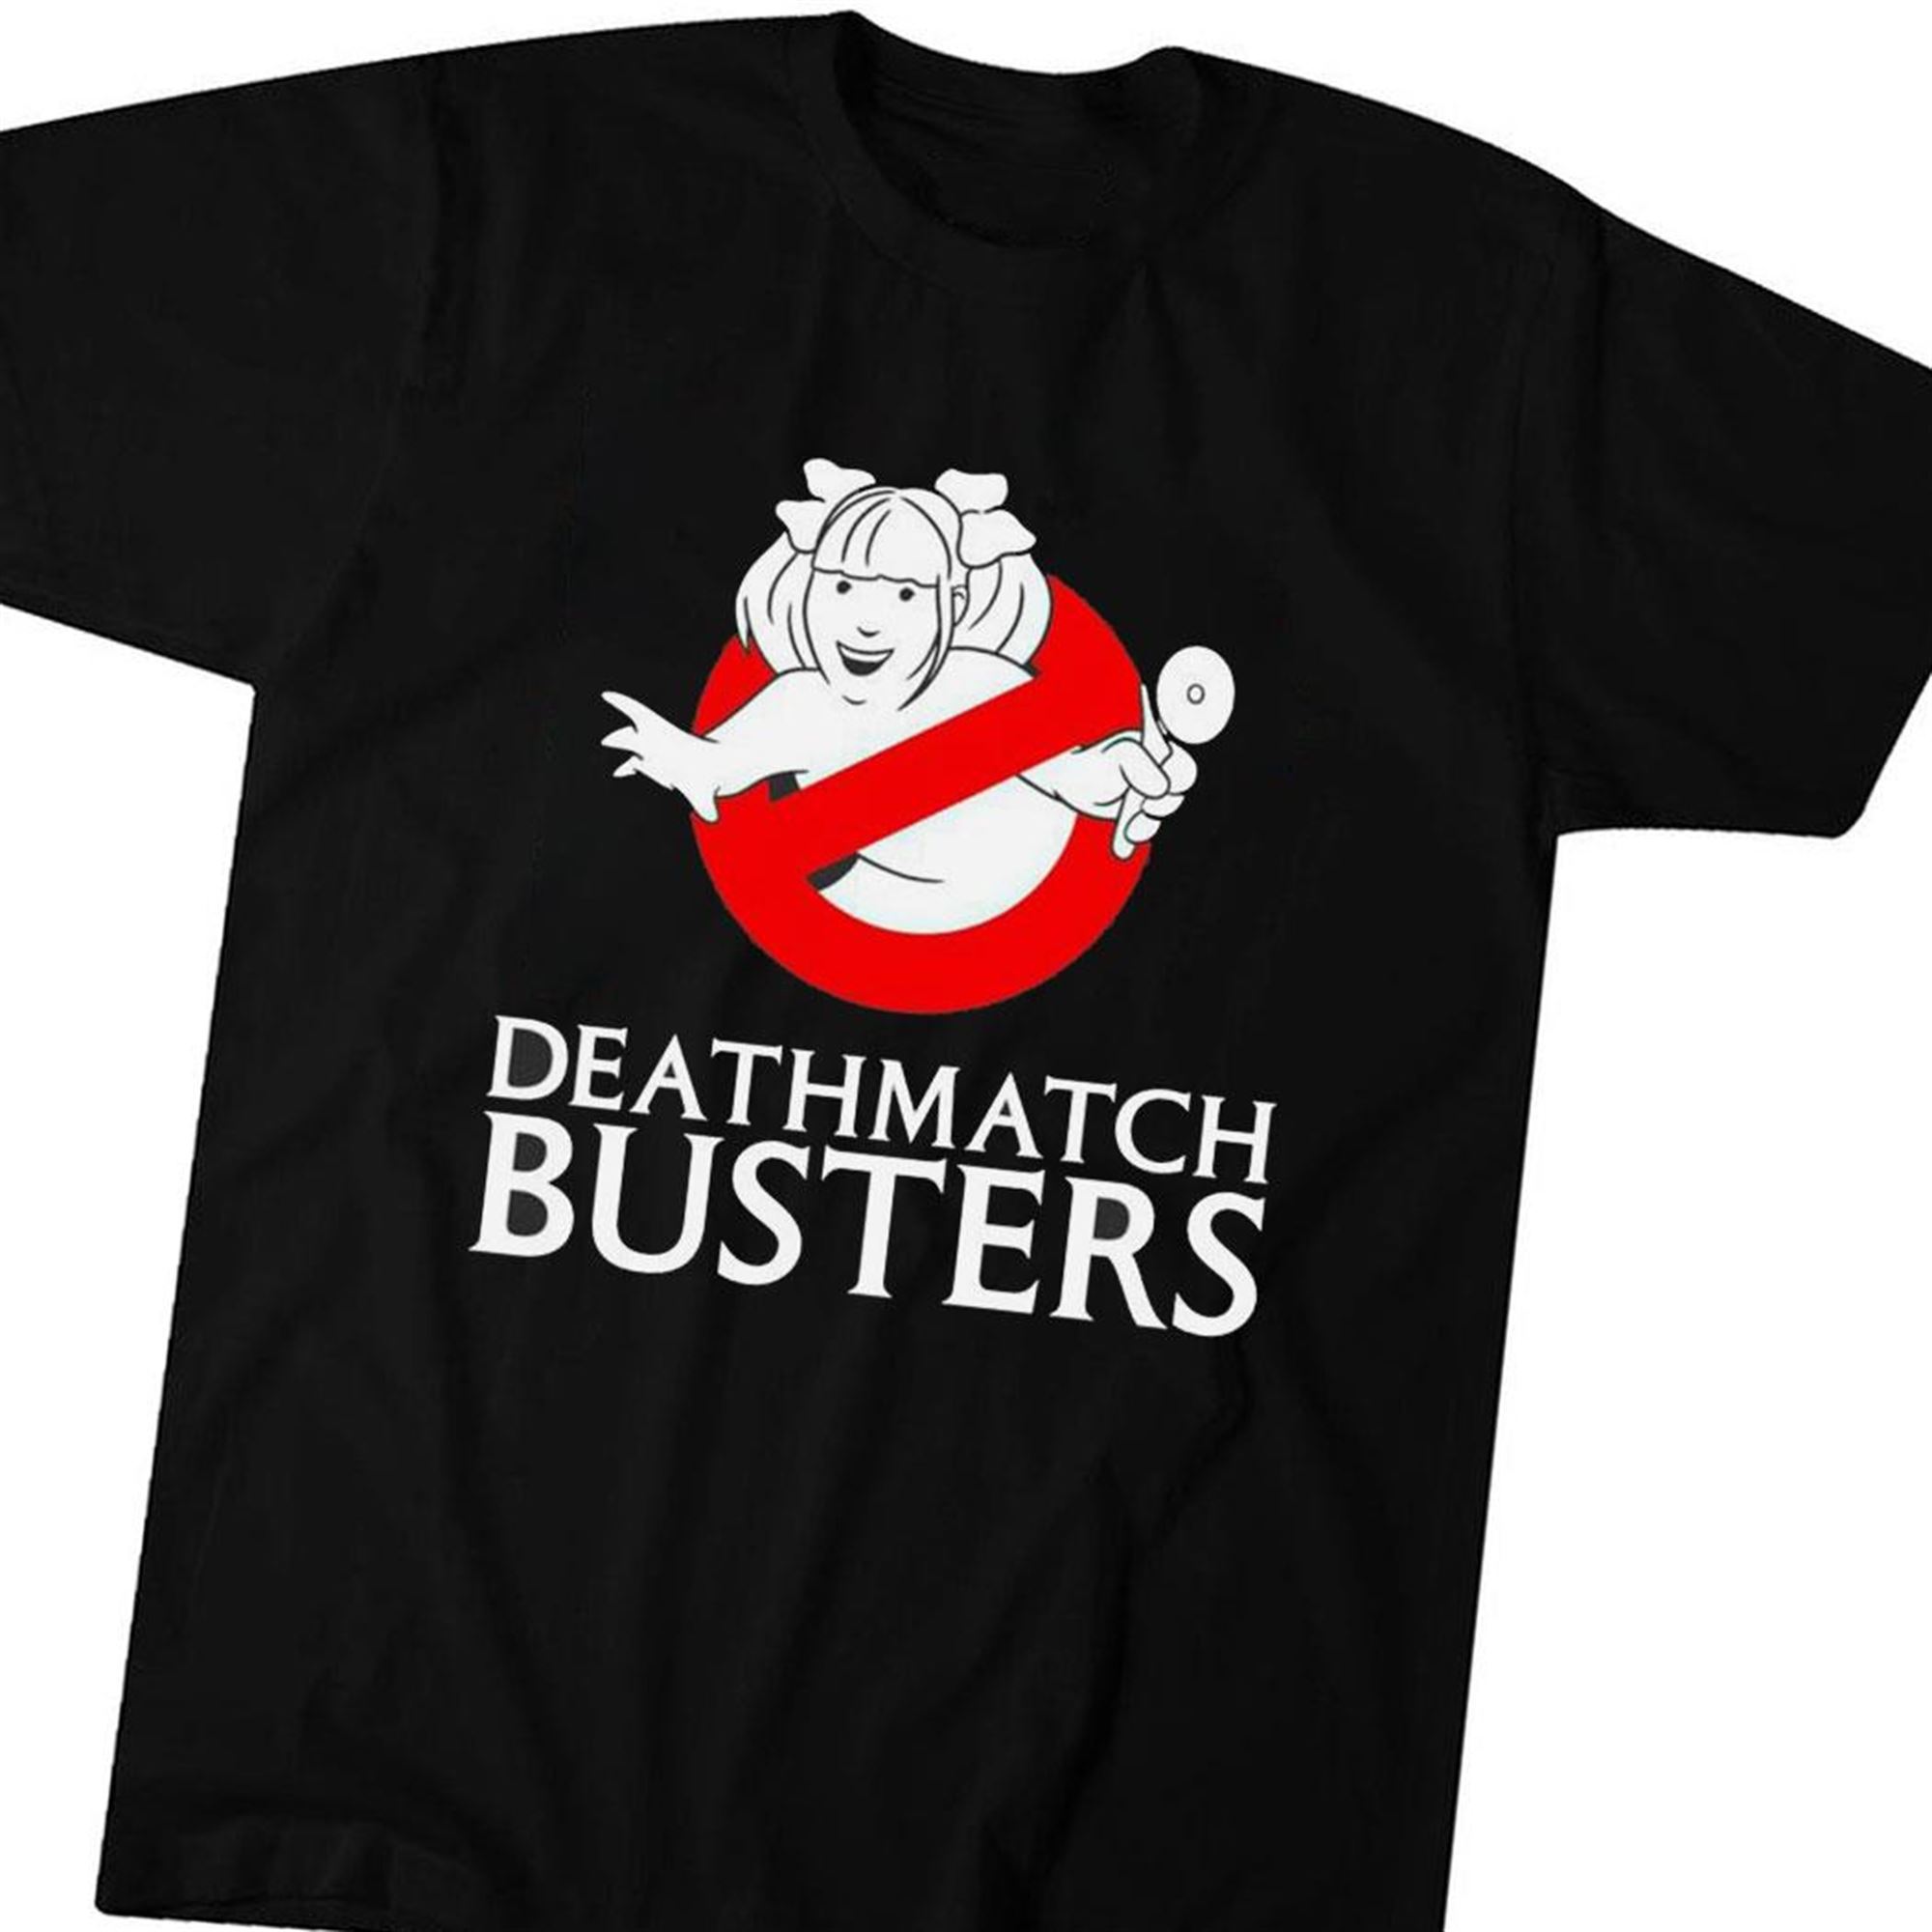 Deathmatch Busters T-shirt